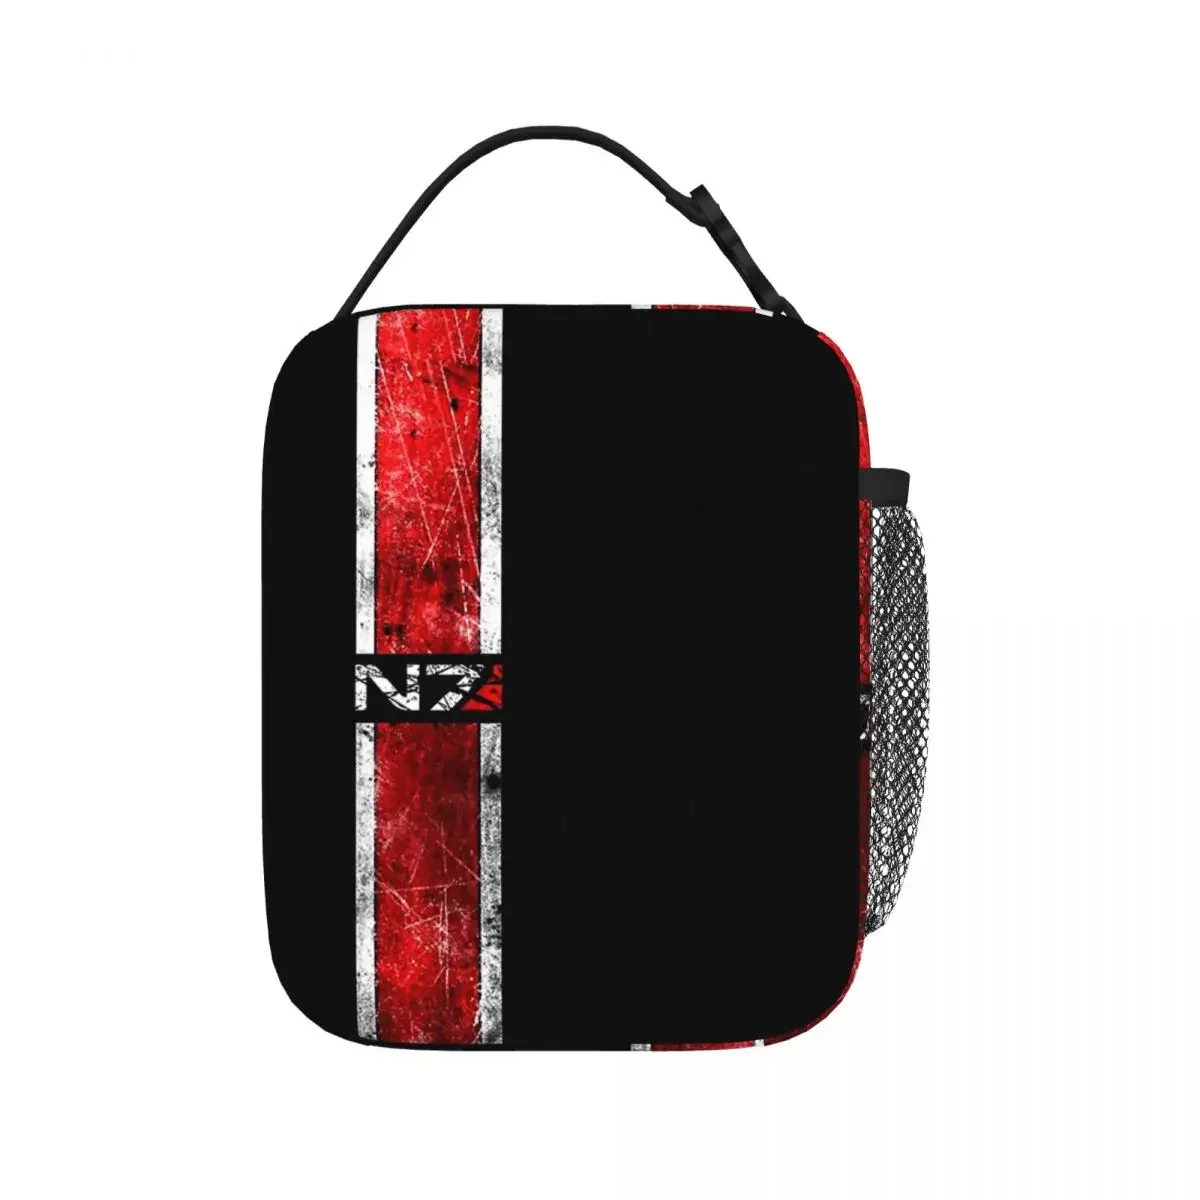 

Mass Effect - N7 Insulated Lunch Bags Resuable Picnic Bags Thermal Cooler Lunch Box Lunch Tote for Woman Work Kids School